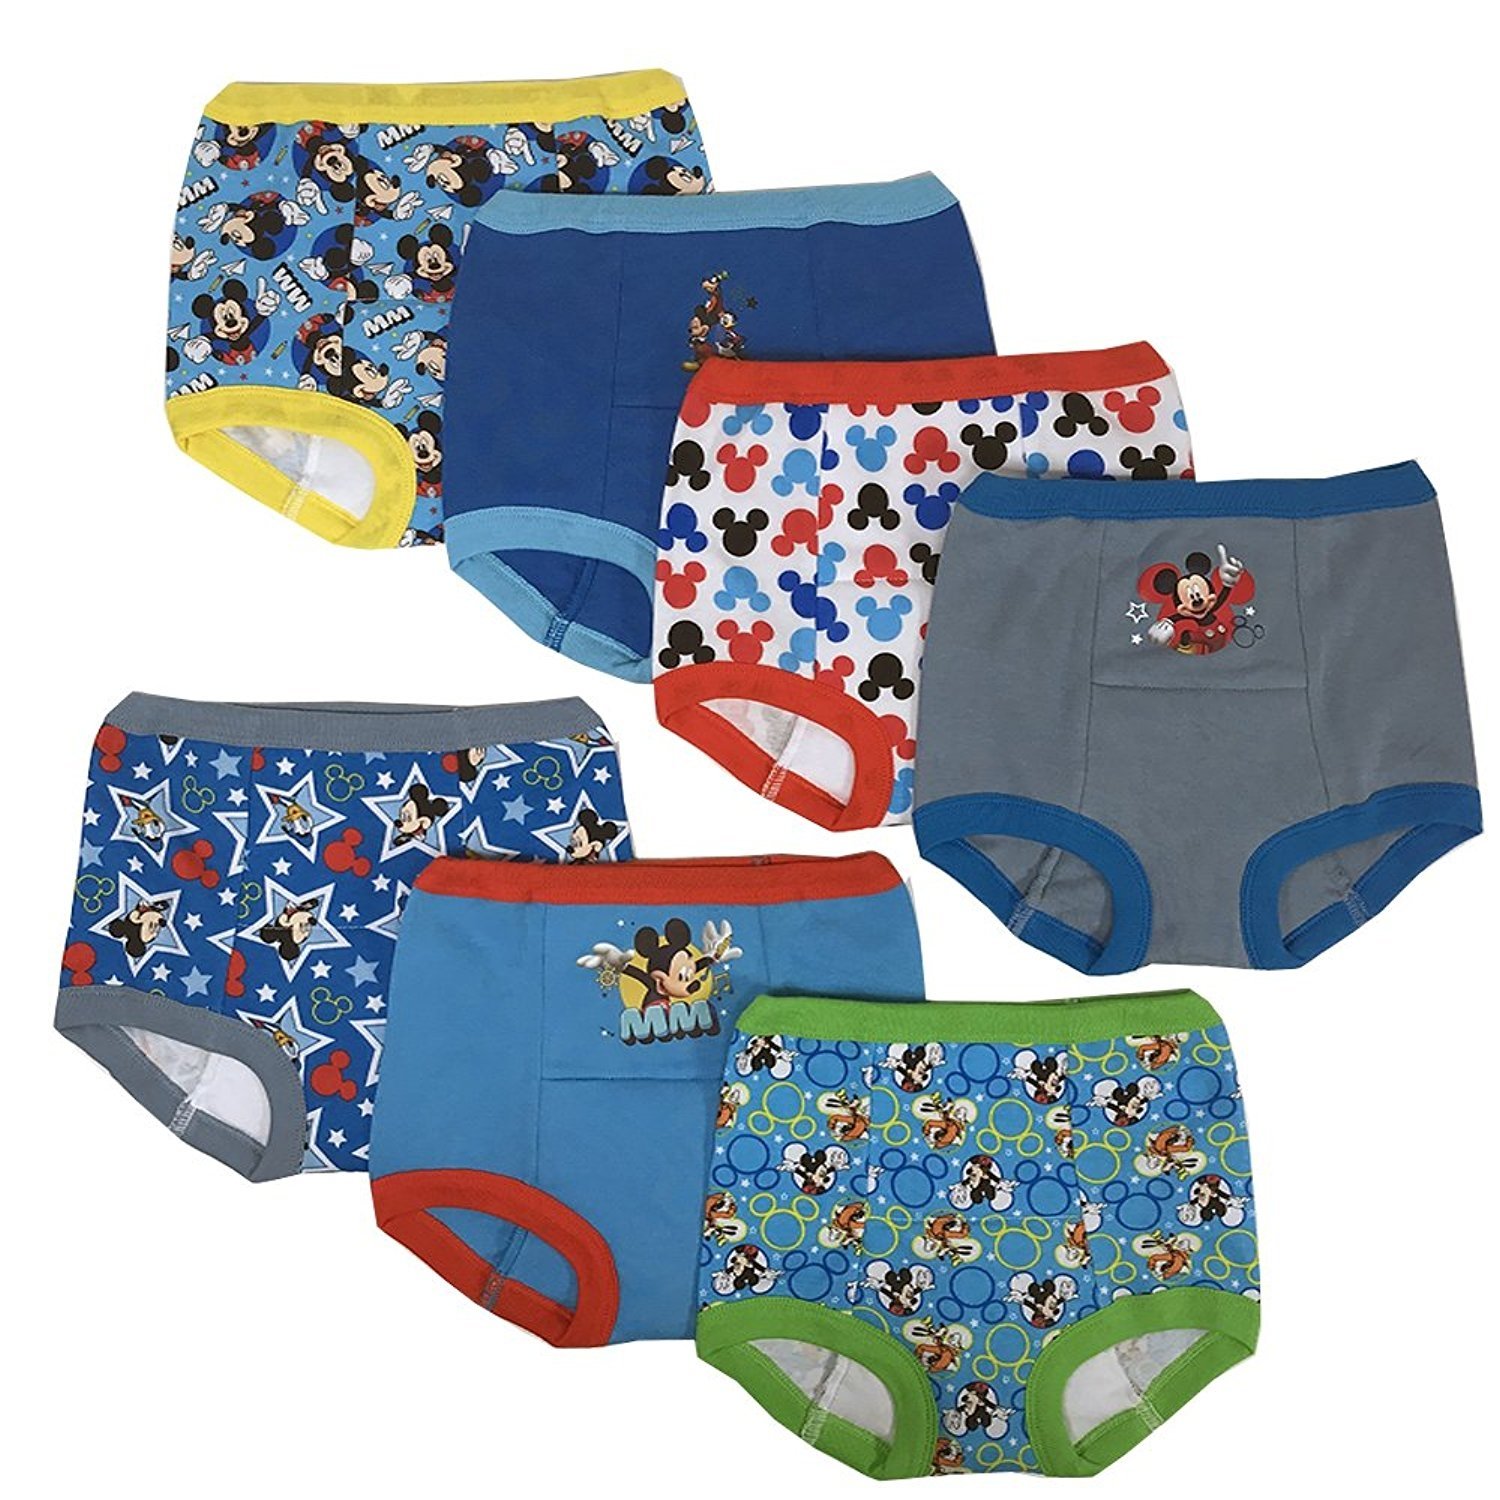 Mickey Mouse Potty Training Pants Underwear, 3-Pack (Toddler Boys)